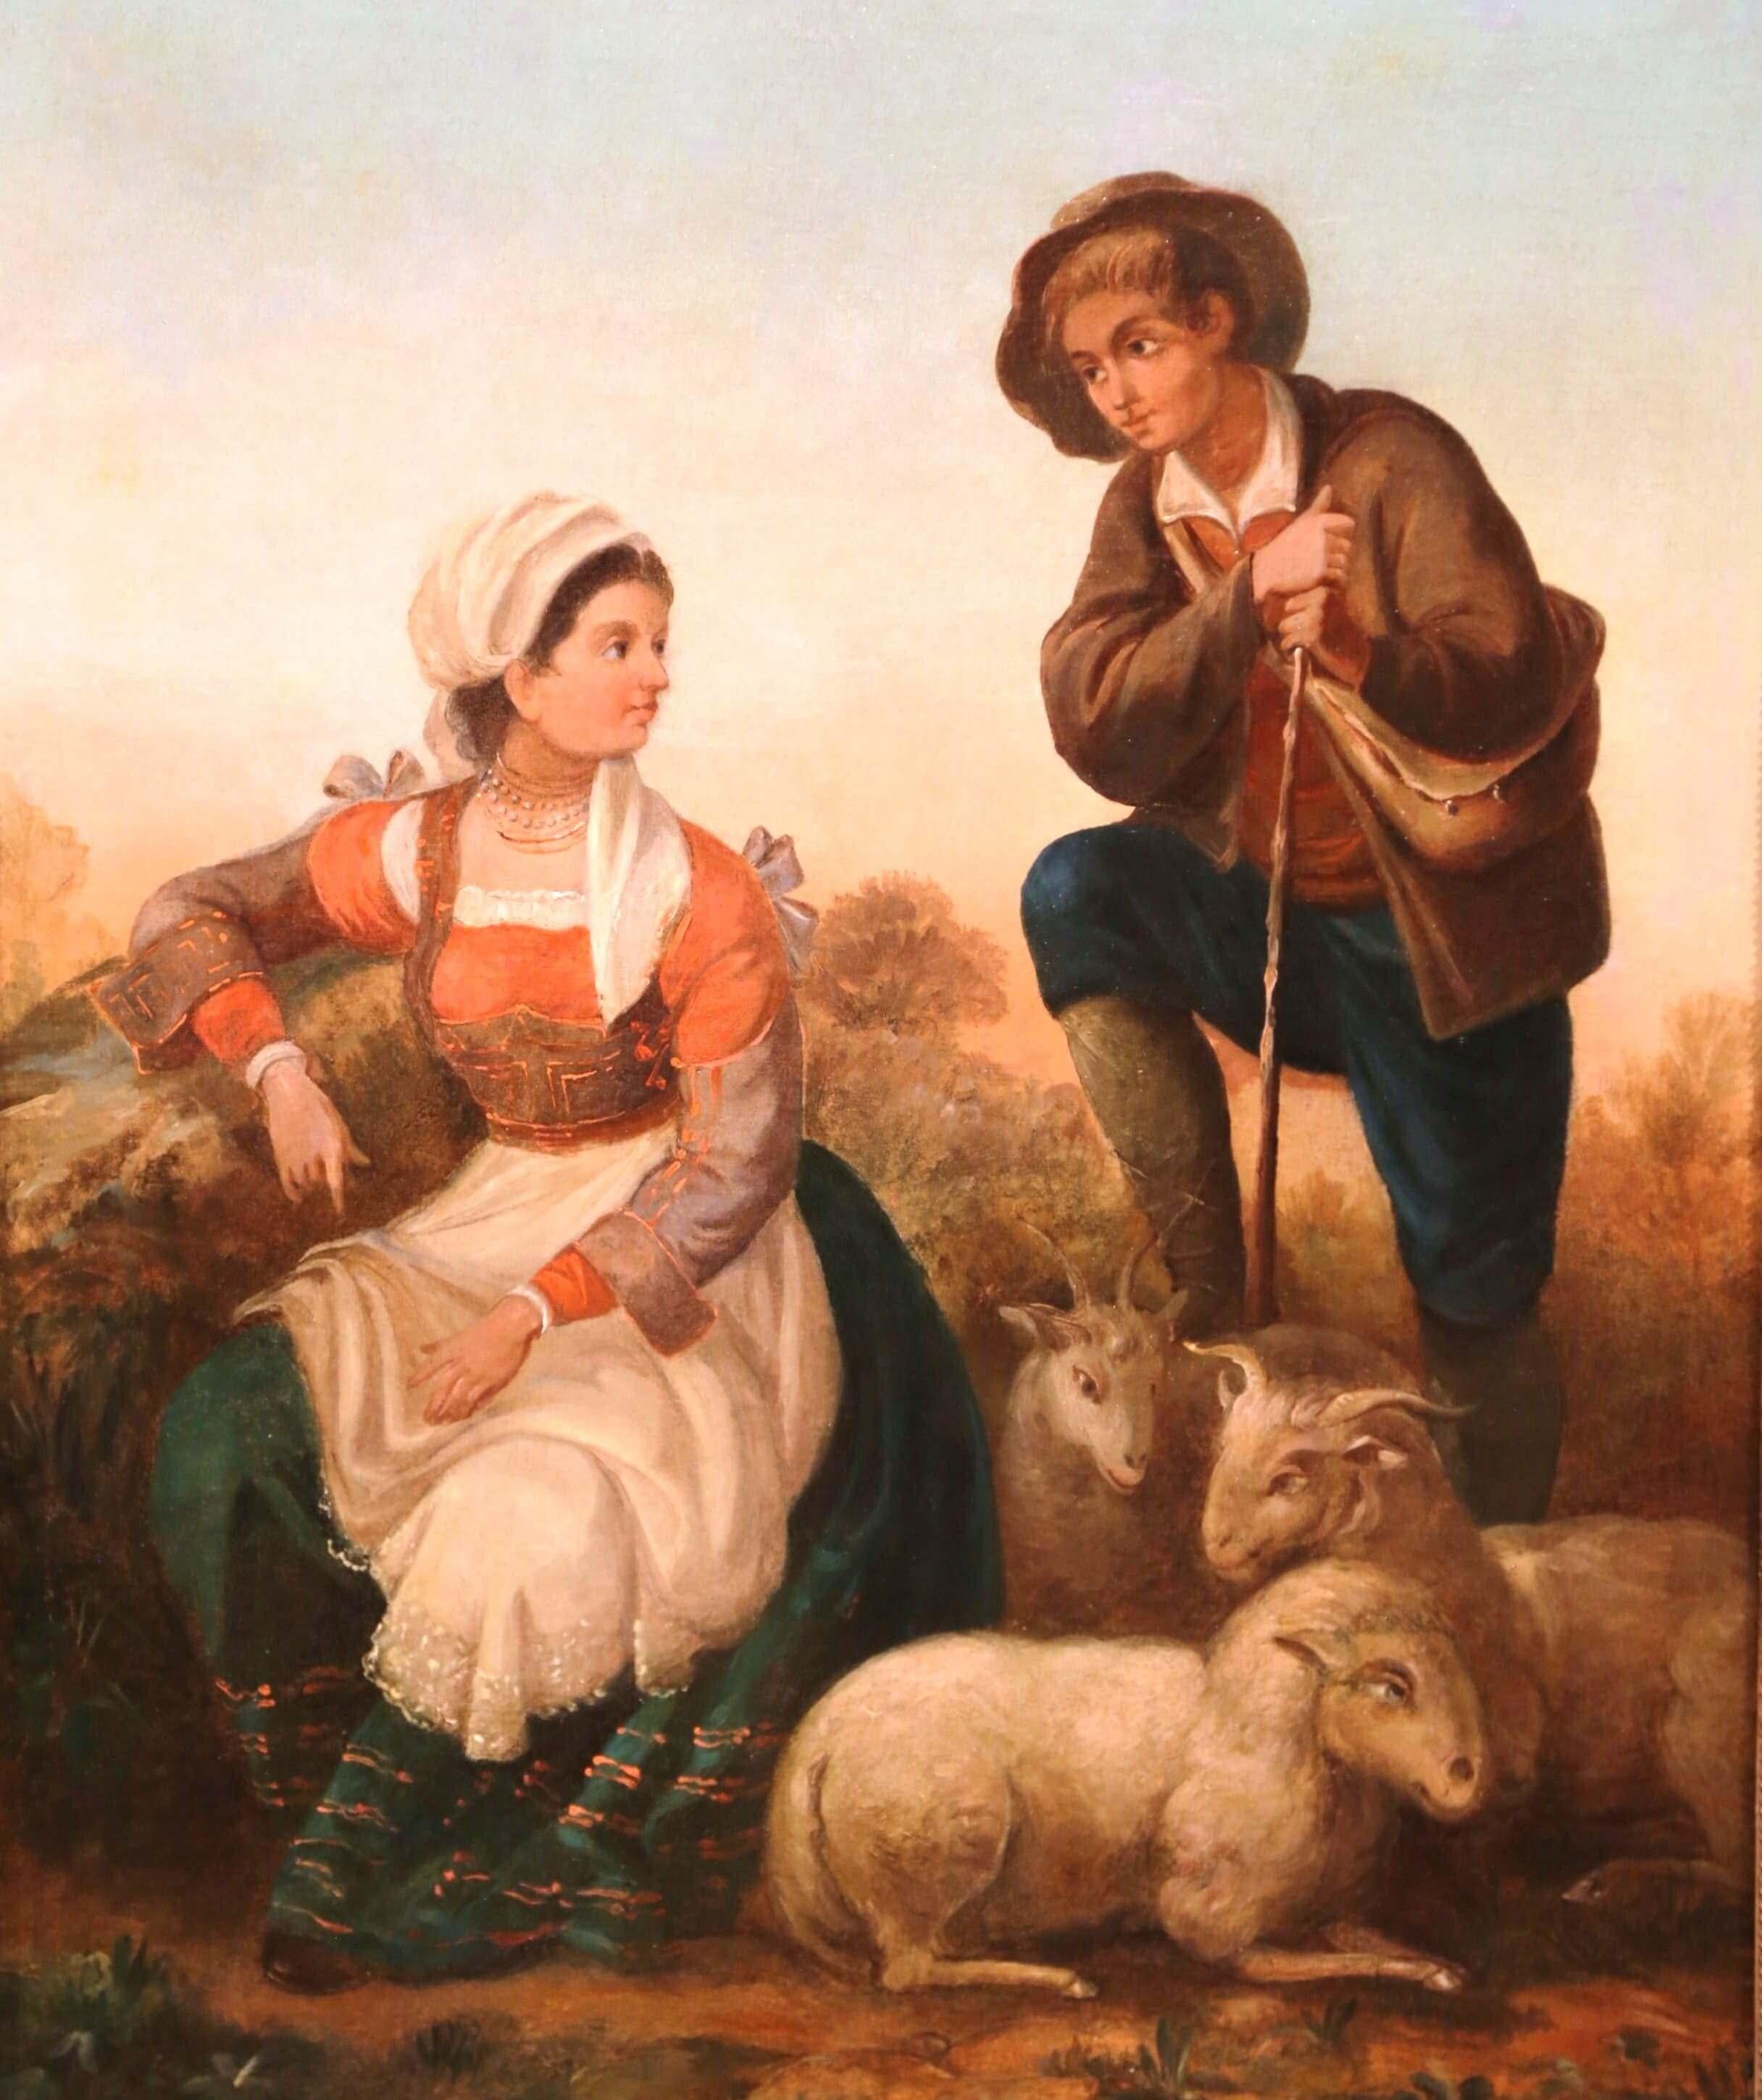 This large antique oil on canvas was painted in France, circa 1850. This colorful painting illustrates a pastoral country scene with a shepherd courting a young girl, while attending his sheep. The two figures are set in a countryside landscape, and